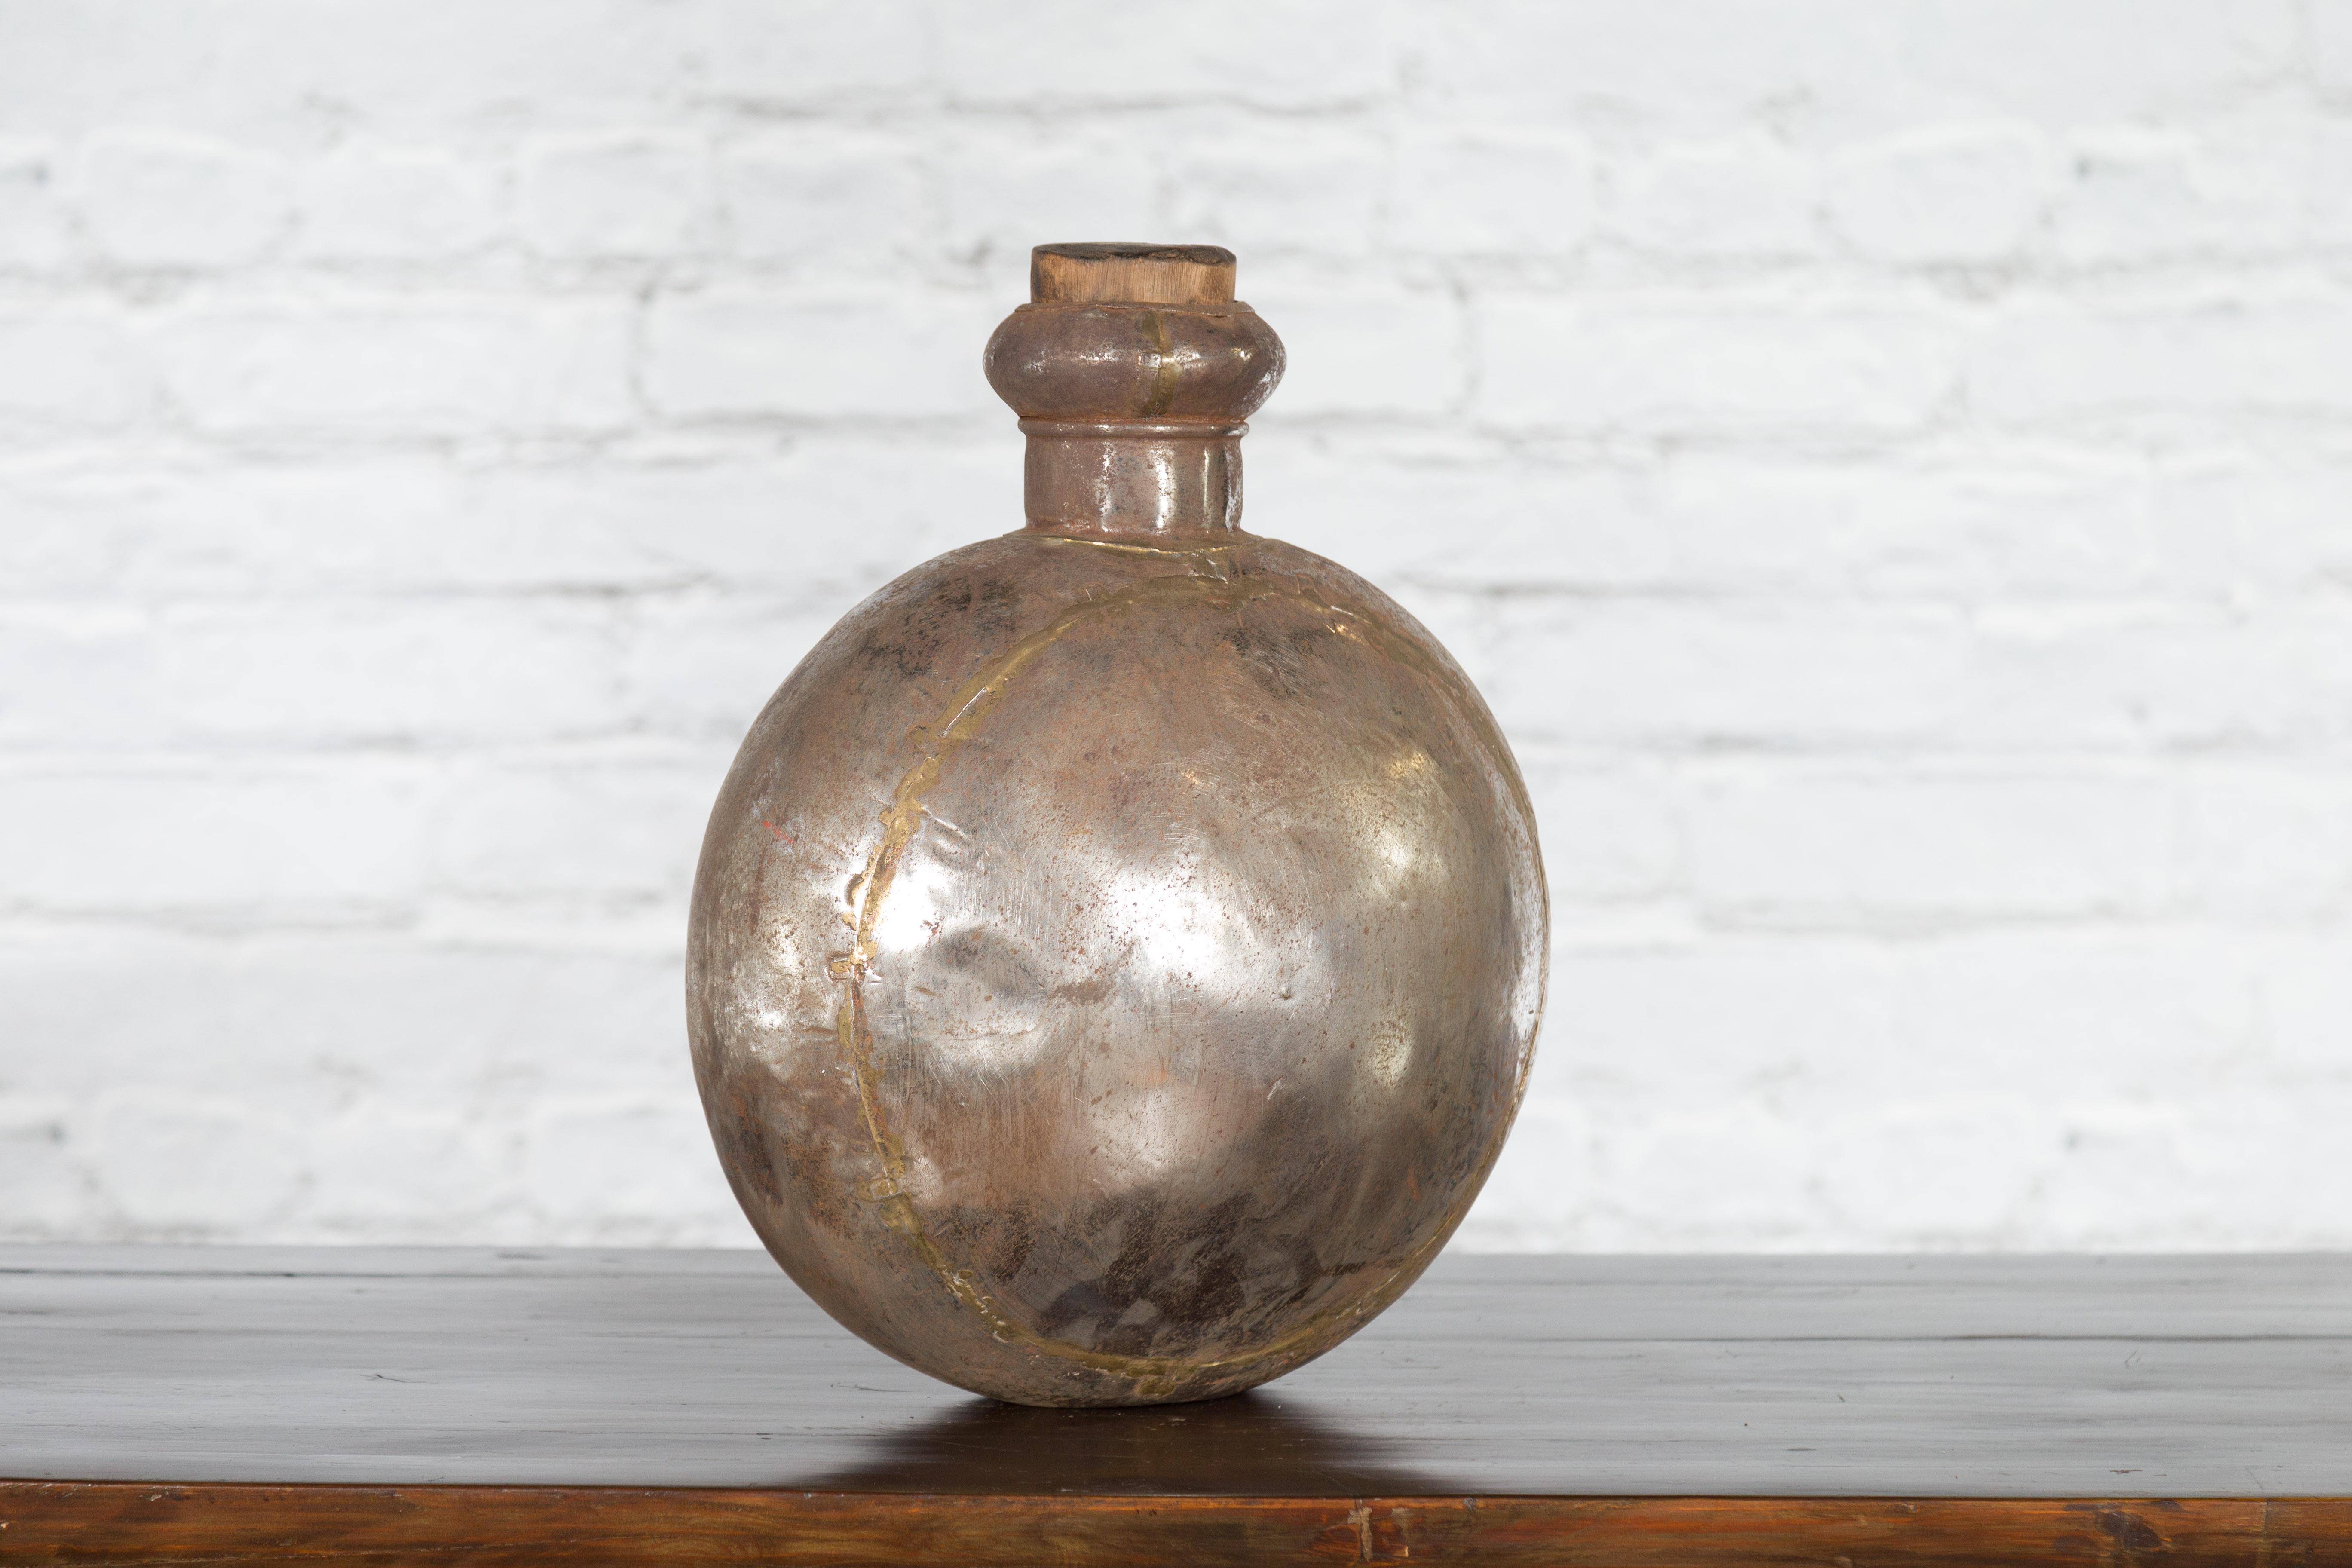 Indian Vintage Metal Water Vase with Cork Style Top and Circular Body For Sale 2